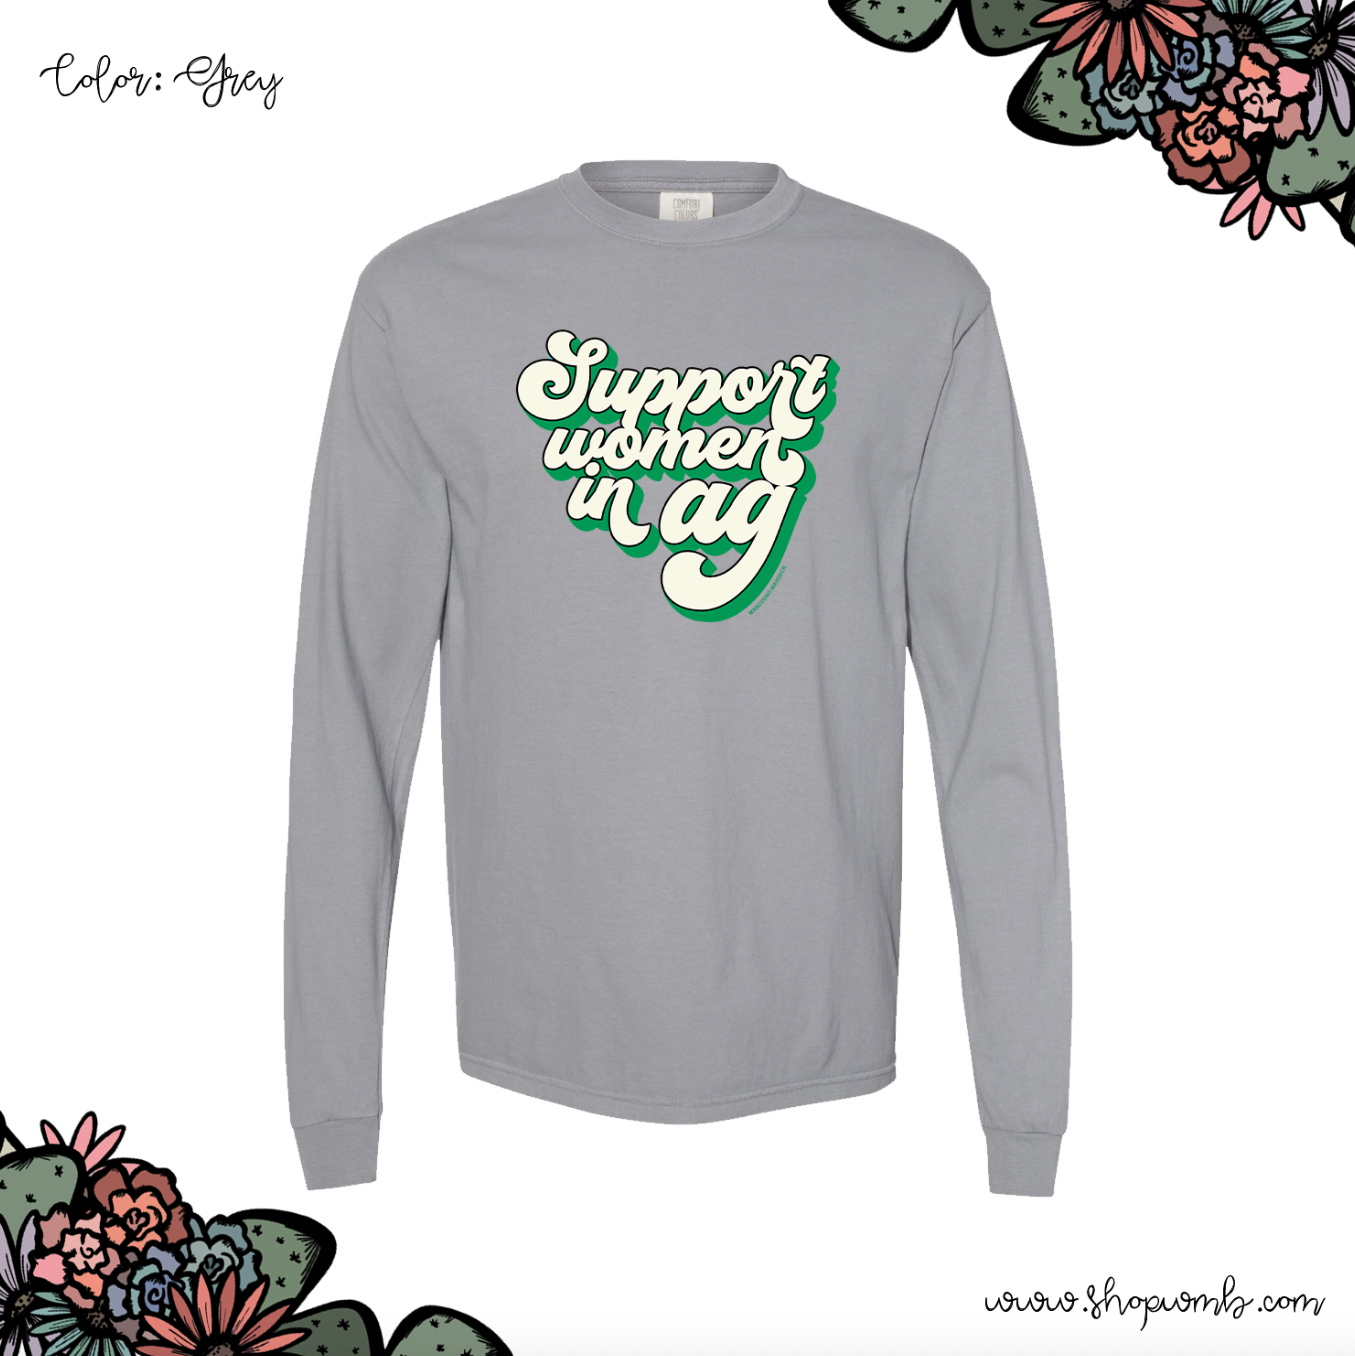 Retro Support Women In Ag Green LONG SLEEVE T-Shirt (S-3XL) - Multiple Colors!